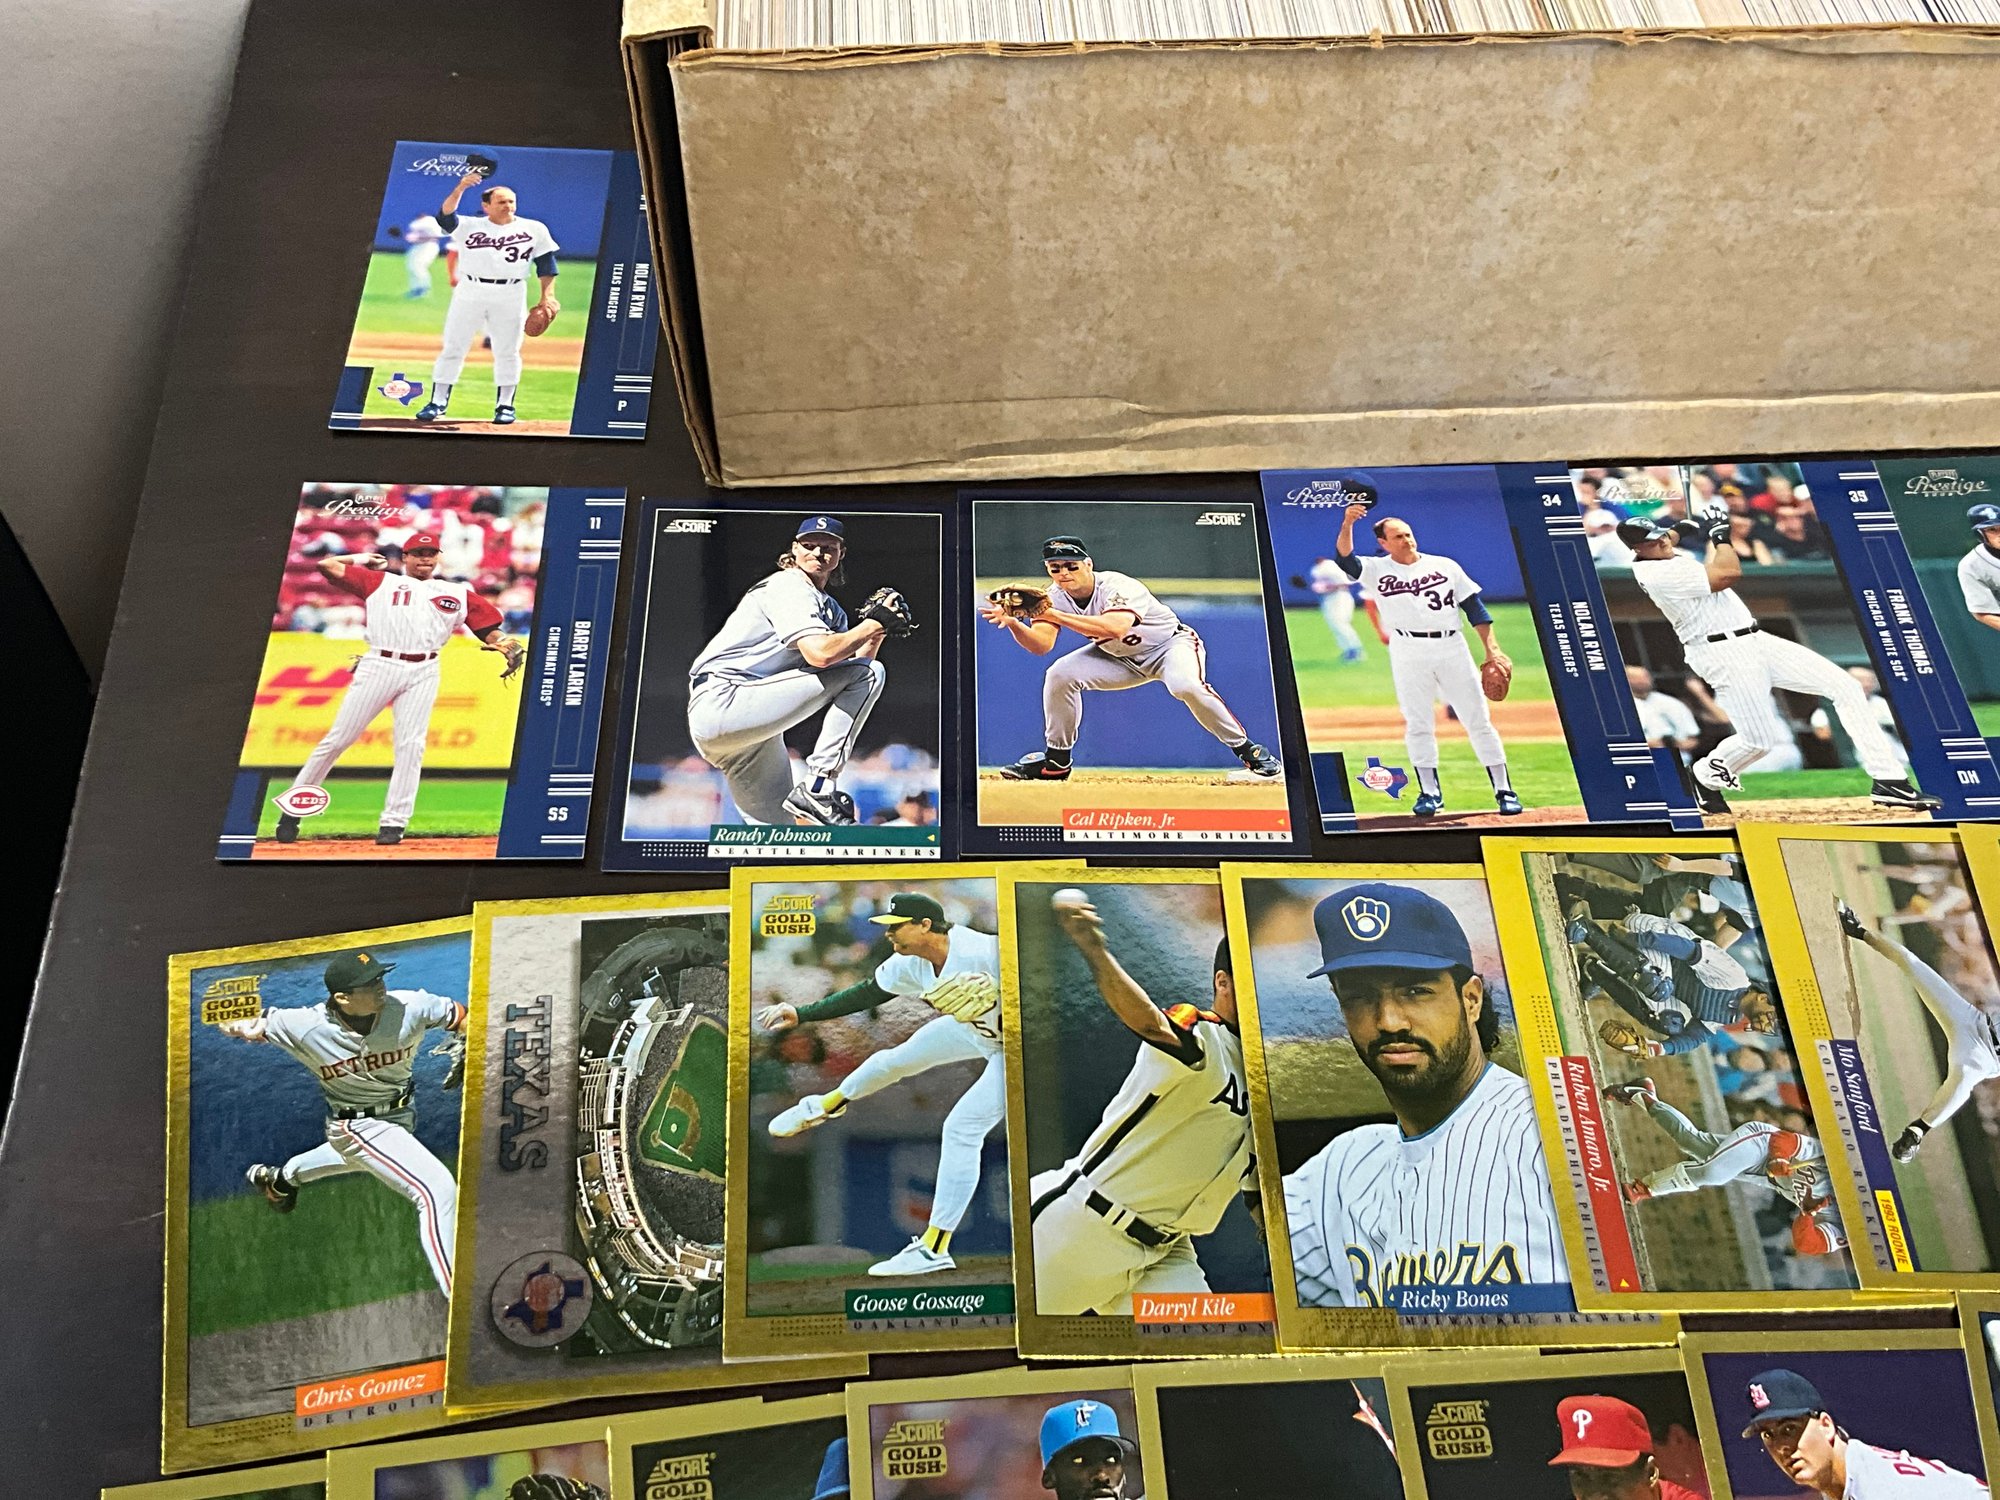 2 Row Box Of Baseball Cards With Rookies Of David Wright, Zimmerman ...